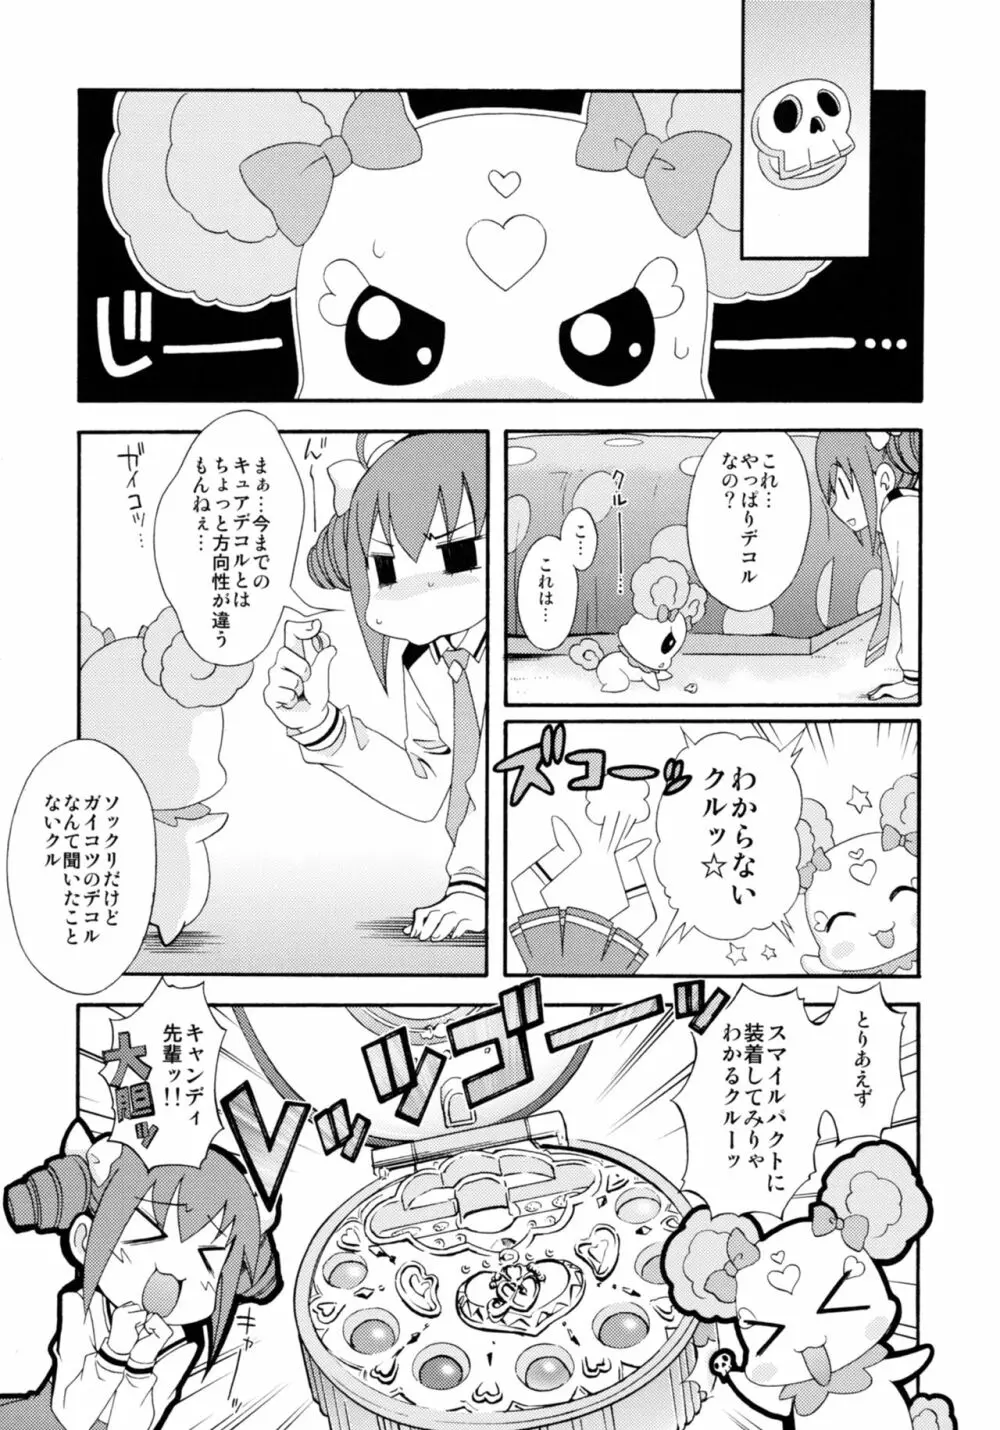 SMILES AND TEARS Vol.01 4ページ